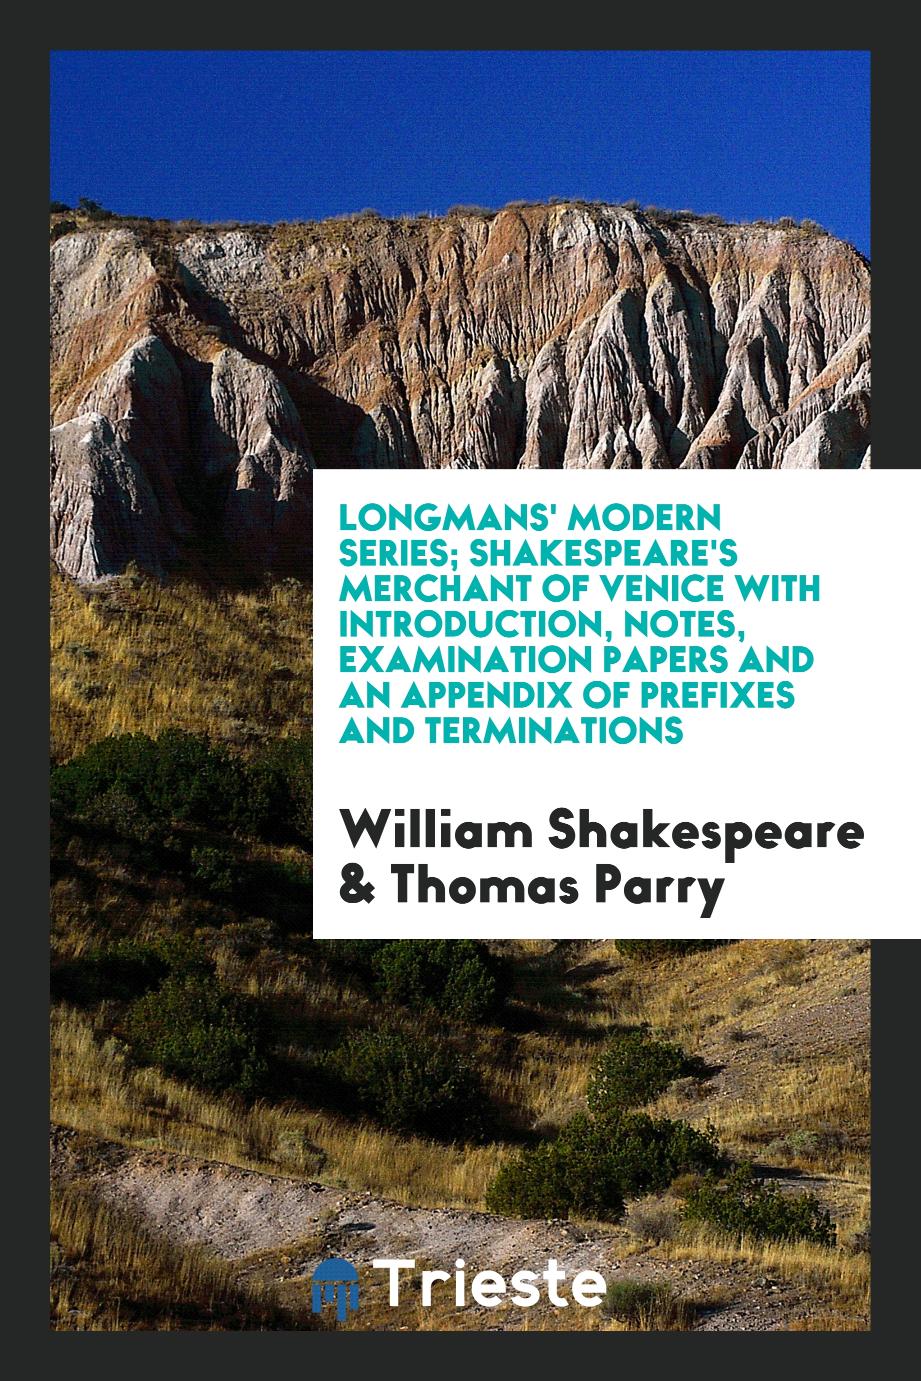 Longmans' Modern Series; Shakespeare's Merchant of Venice with Introduction, Notes, Examination Papers and an Appendix of Prefixes and Terminations